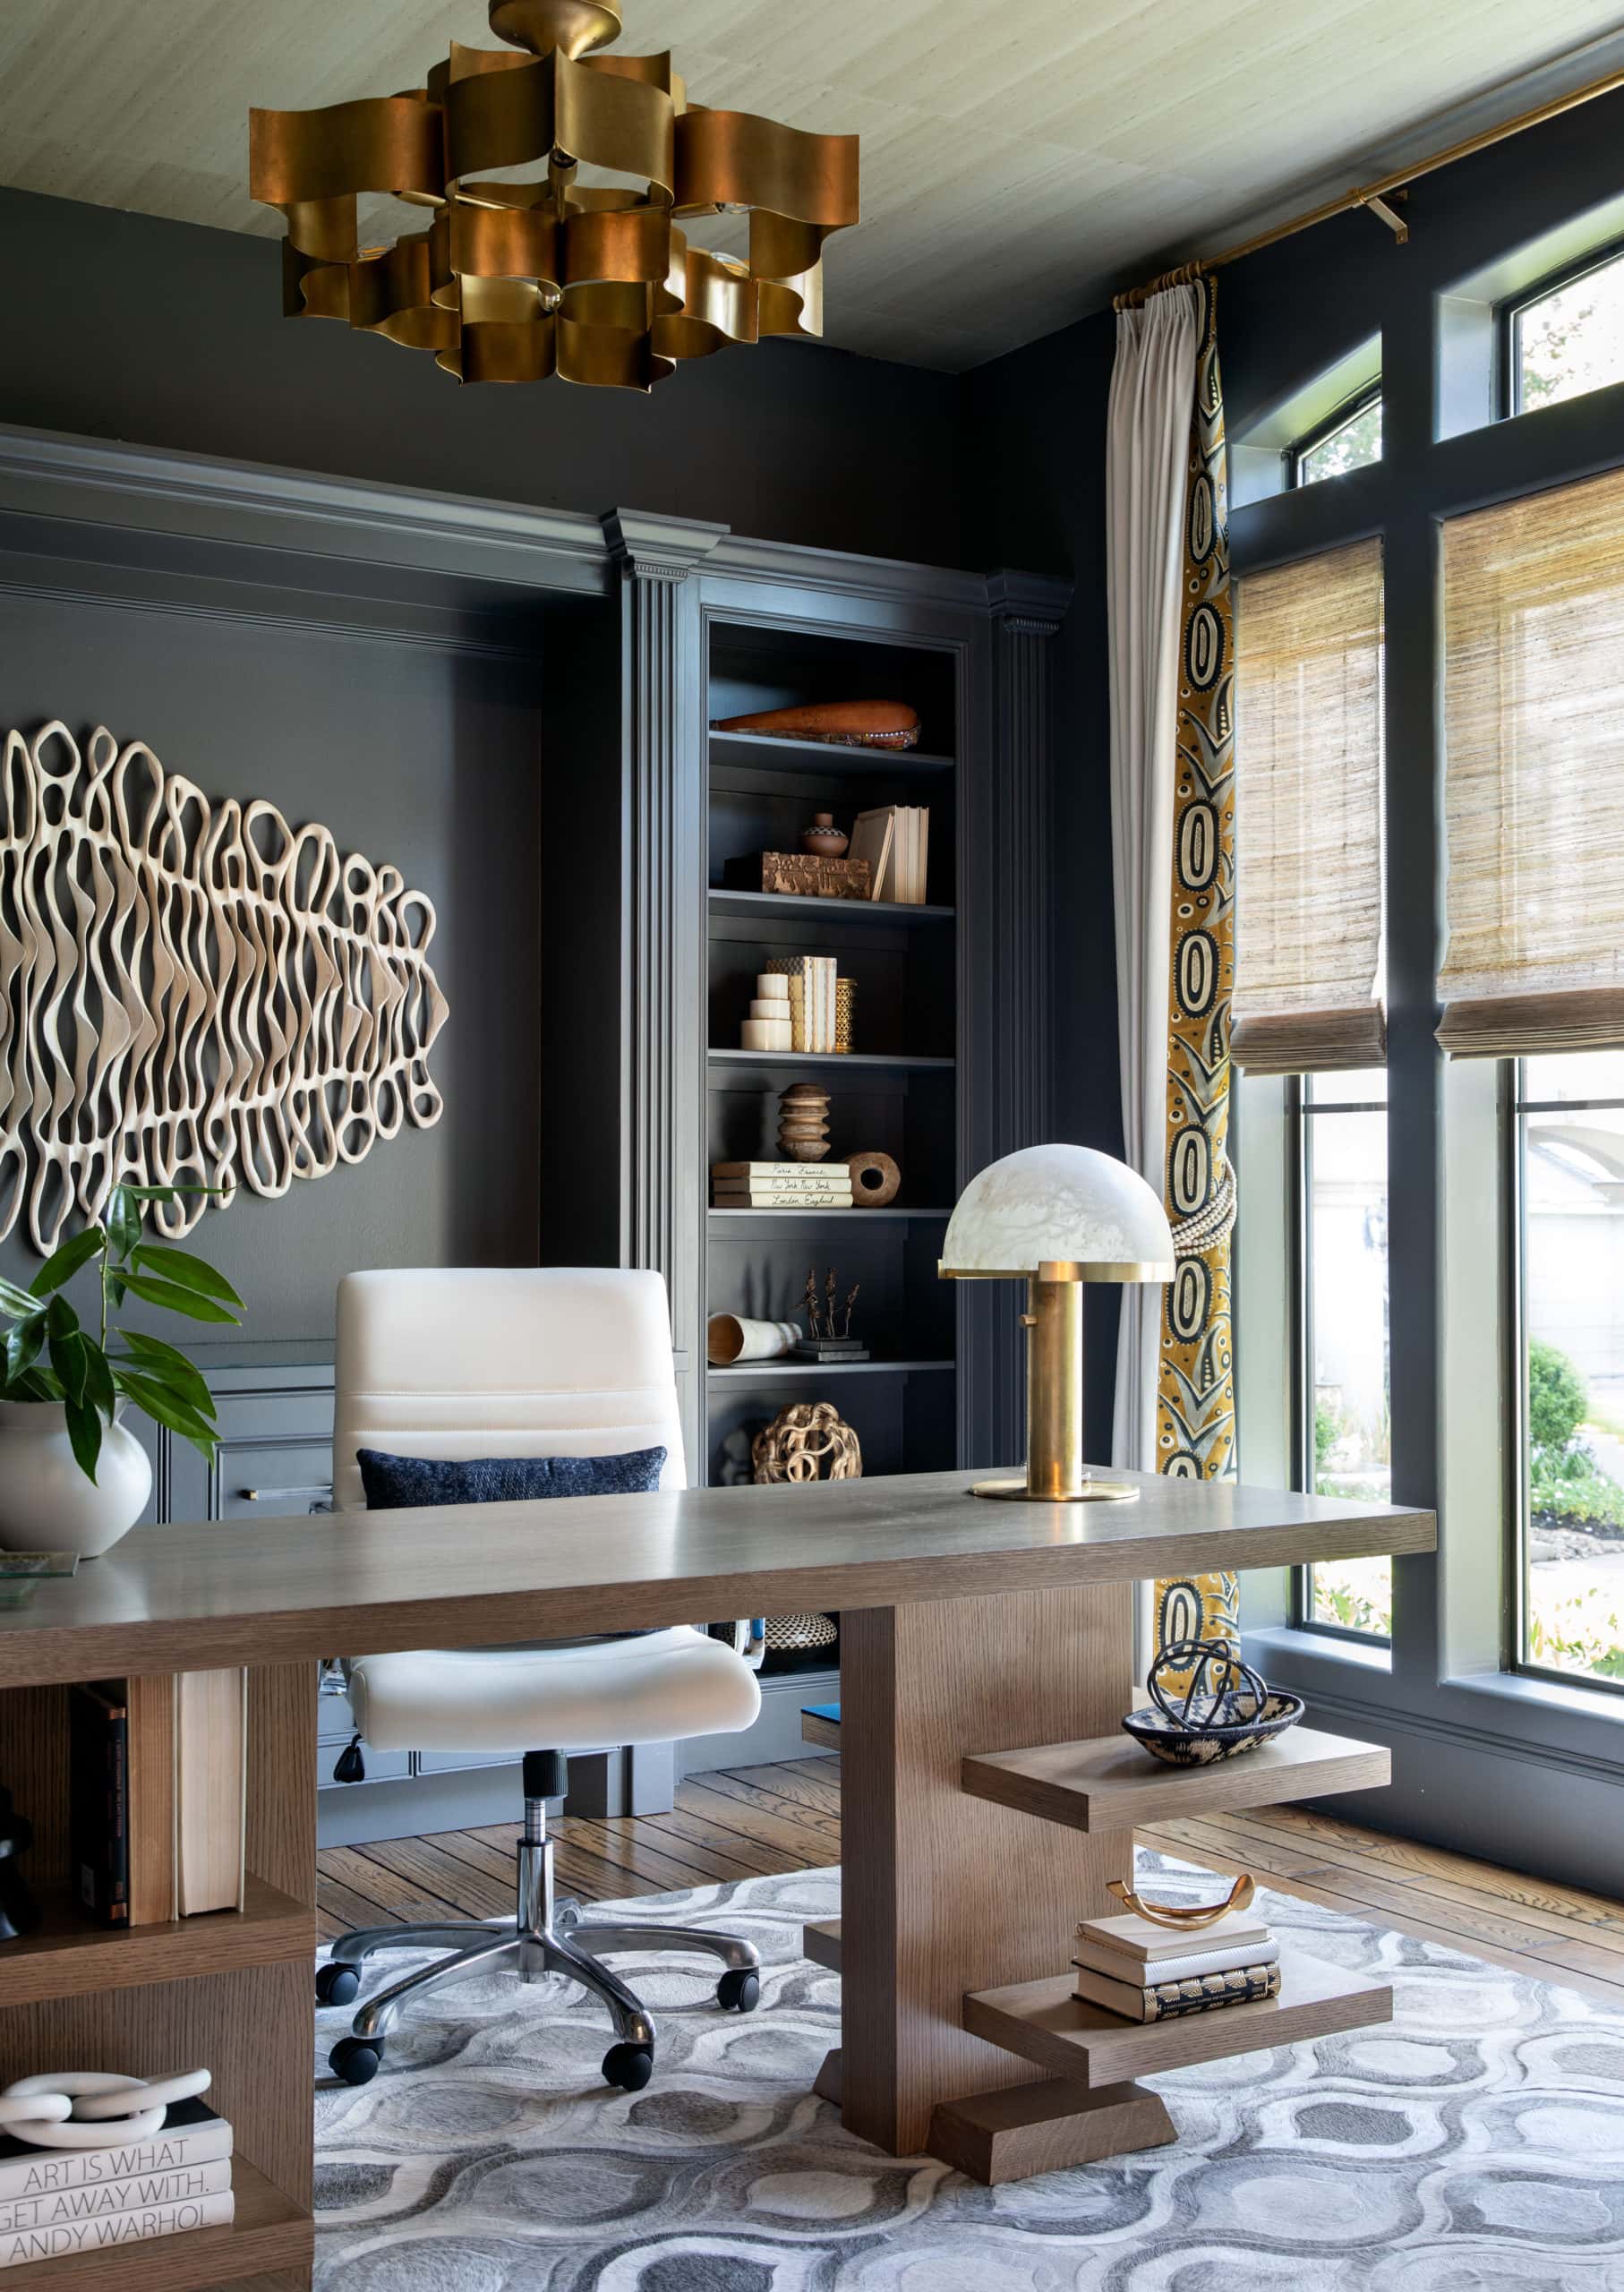 A moody study with artwork from Caprice Pierruci in a home designed by Laura U